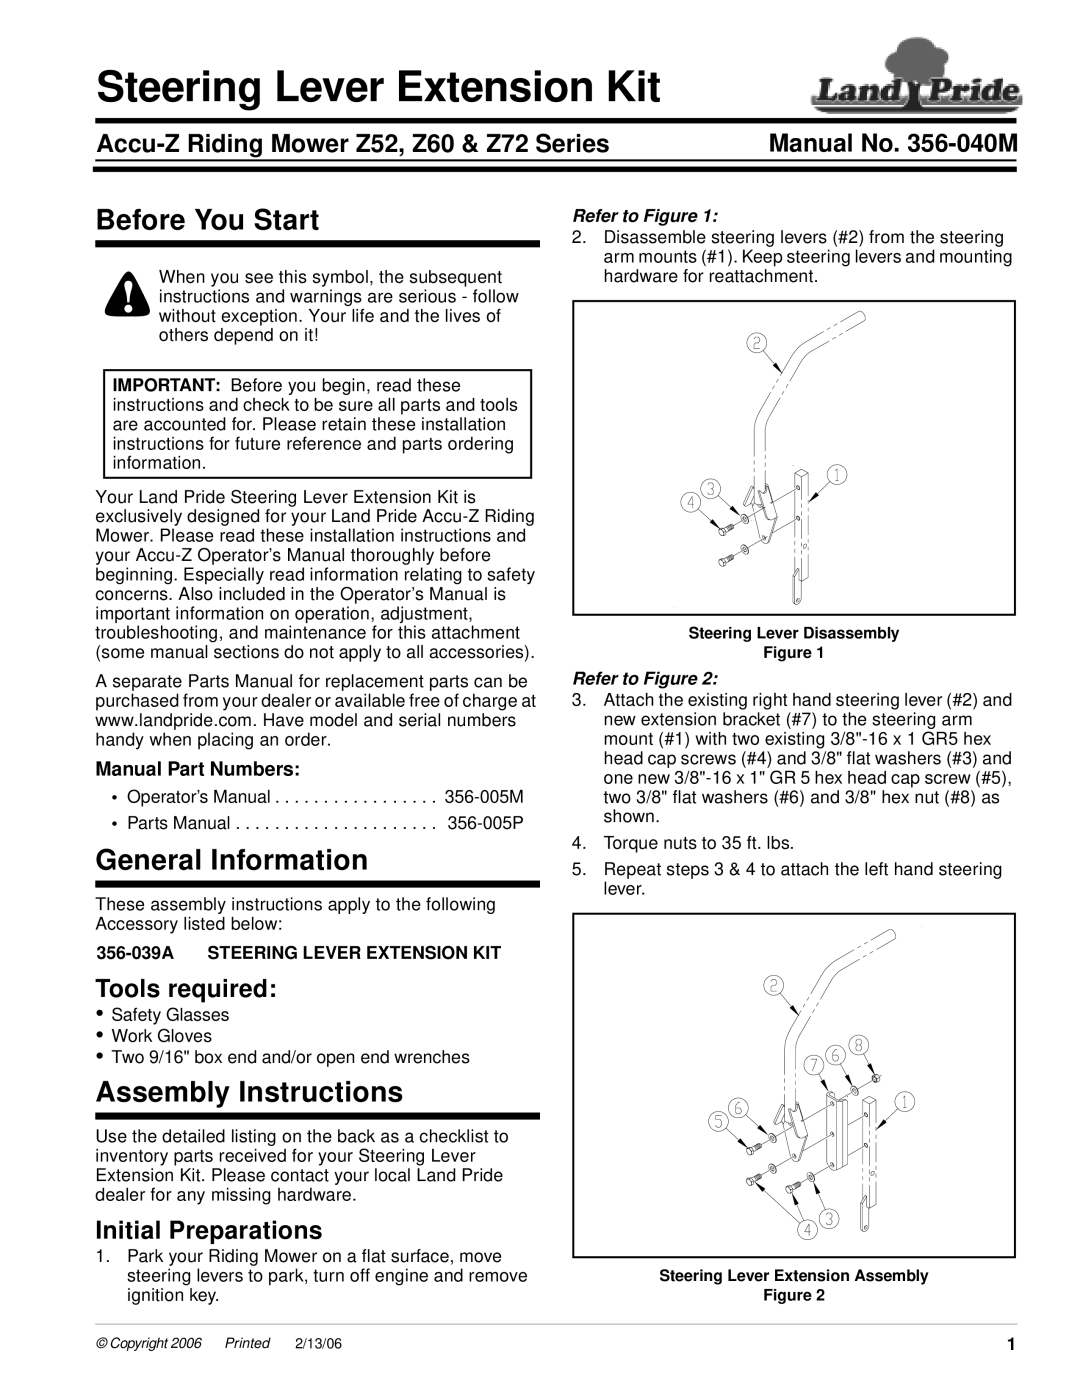 Land Pride installation instructions Accu-ZRiding Mower Z52, Z60 & Z72 Series, Tools required, Initial Preparations 